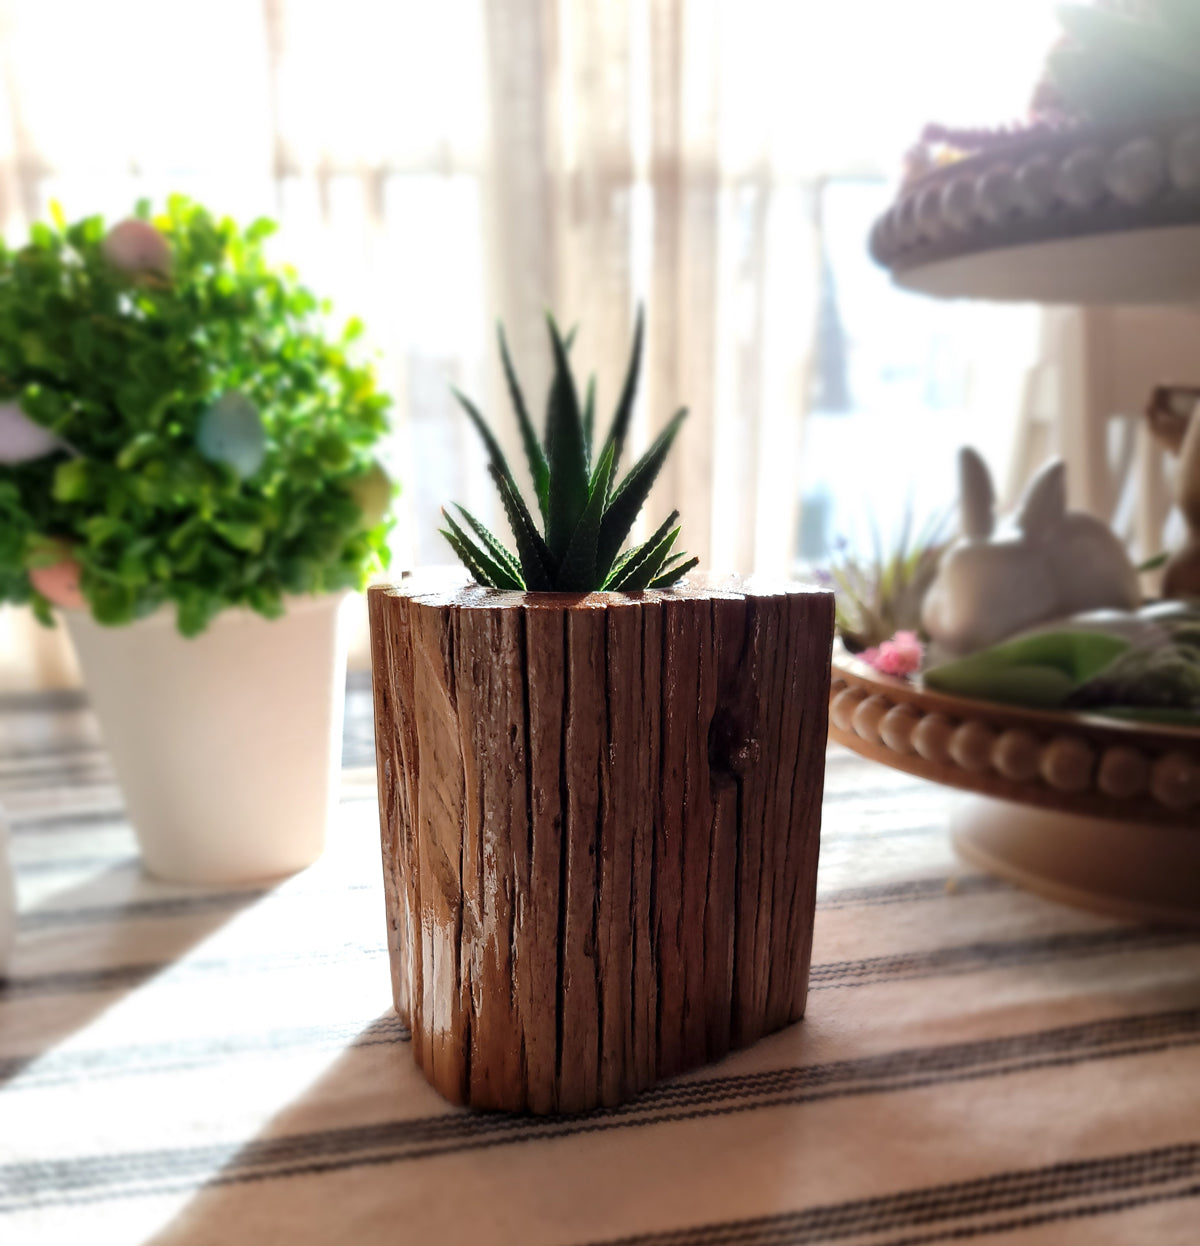 Handmade Planter Made From Stunning Cedar with Unique Knot Detail, Lifestyle Table